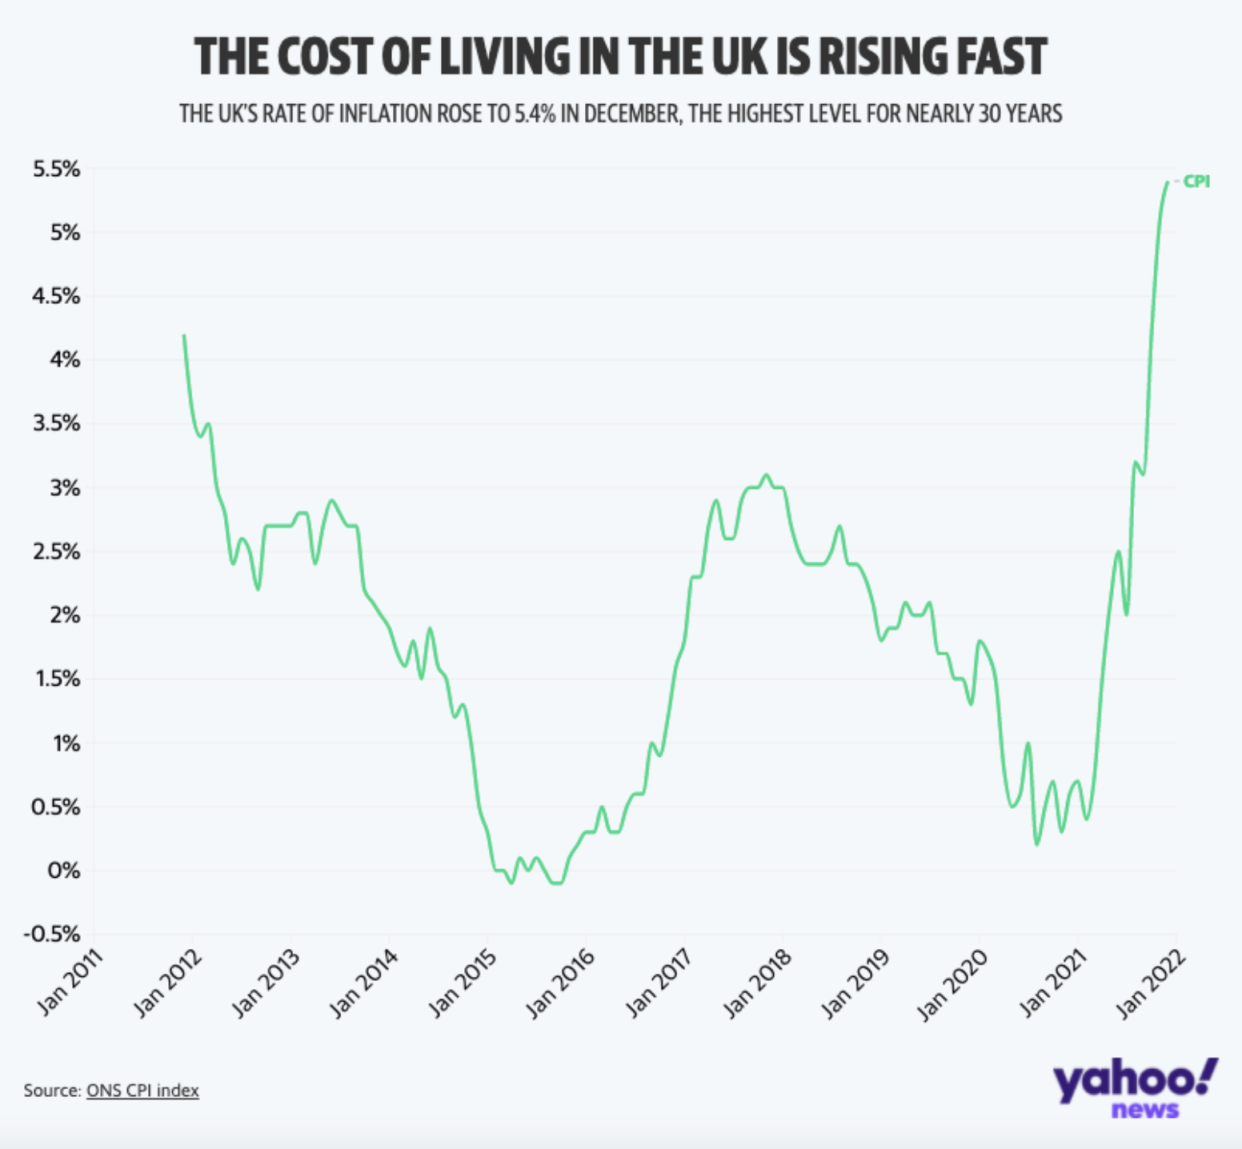 the cost-of-living in the UK is rising fast